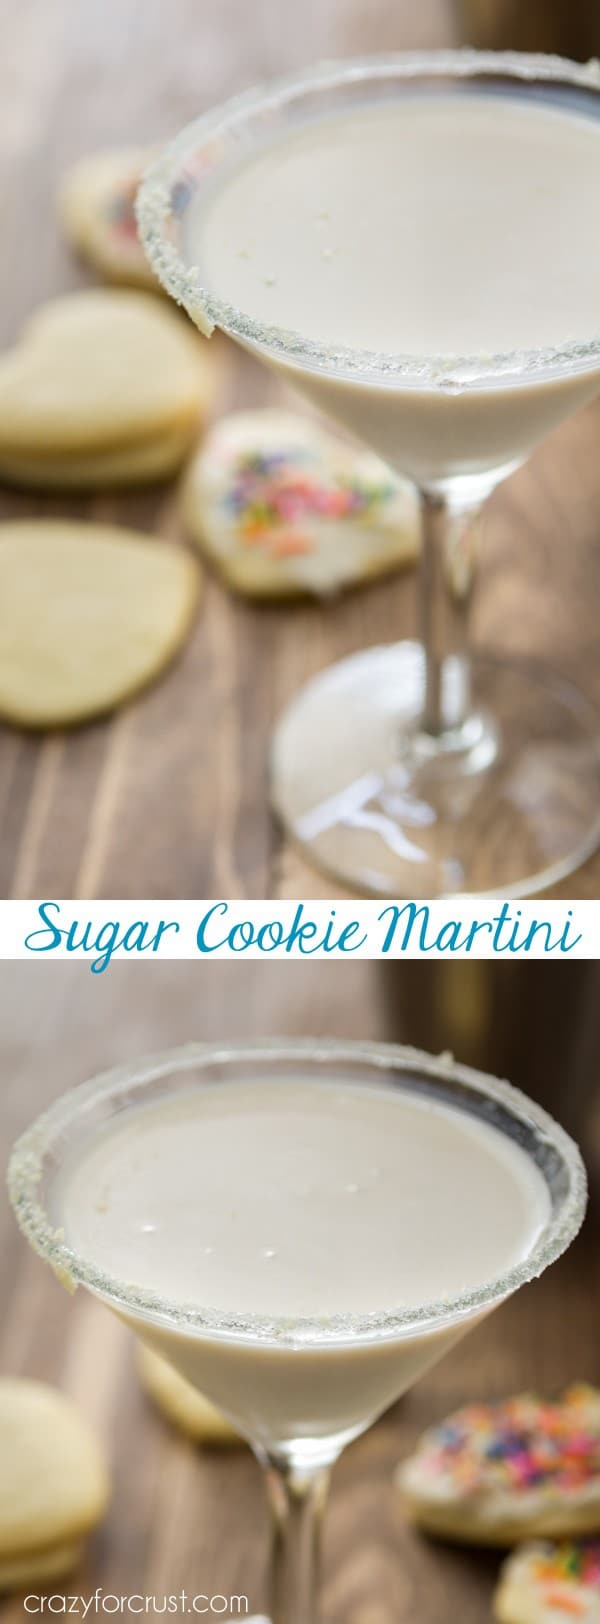 This Sugar Cookie Martini is the perfect signature dessert cocktail for any party. Only 3 ingredients and it tastes like a sugar cookie!